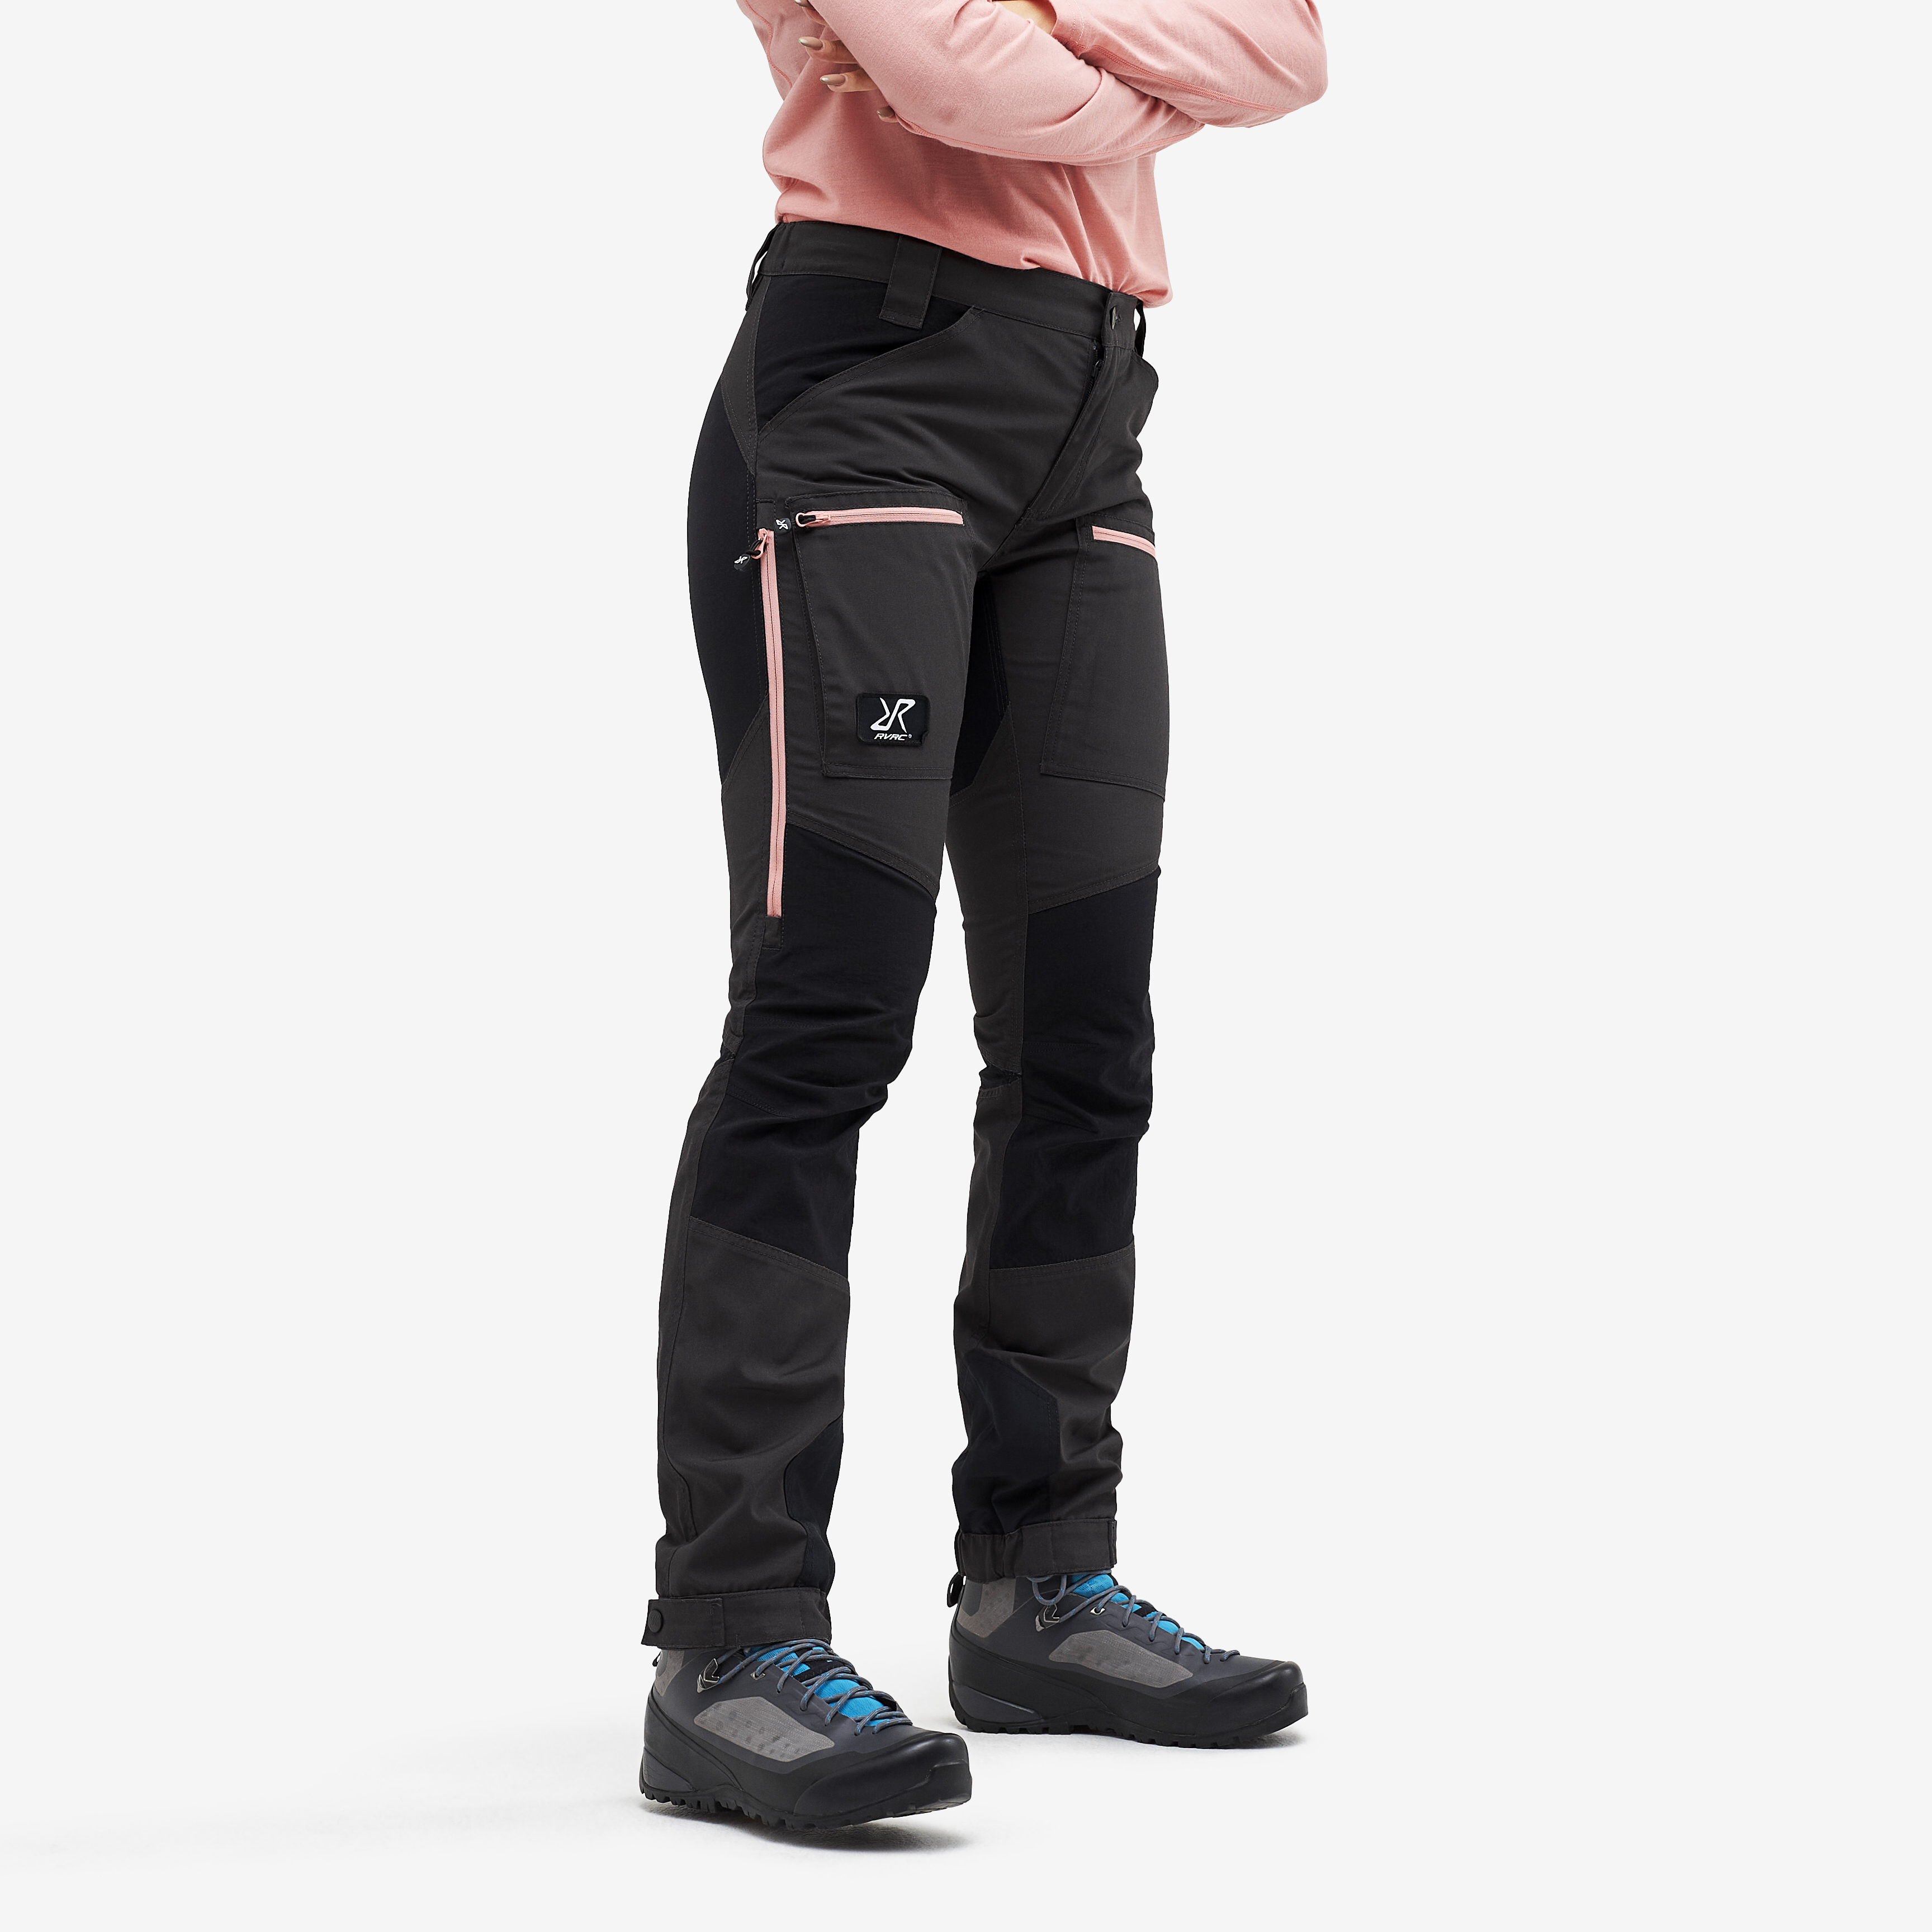 Nordwand Pro Pants Anthracite/Dusty pink Mujeres